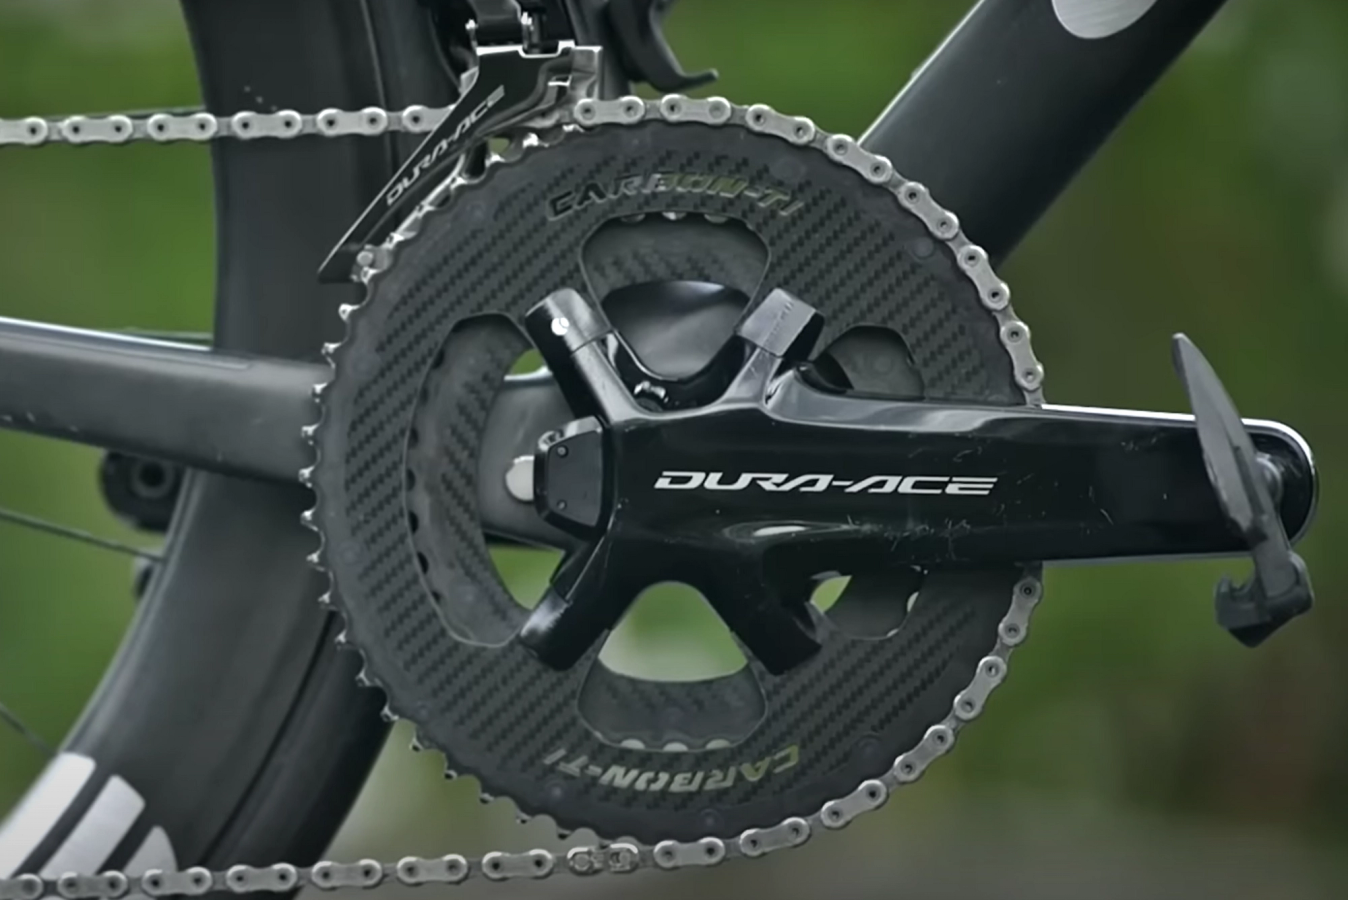 Carbon-Ti chainrings save weight on a bike that clocks in at only 6.9kg.